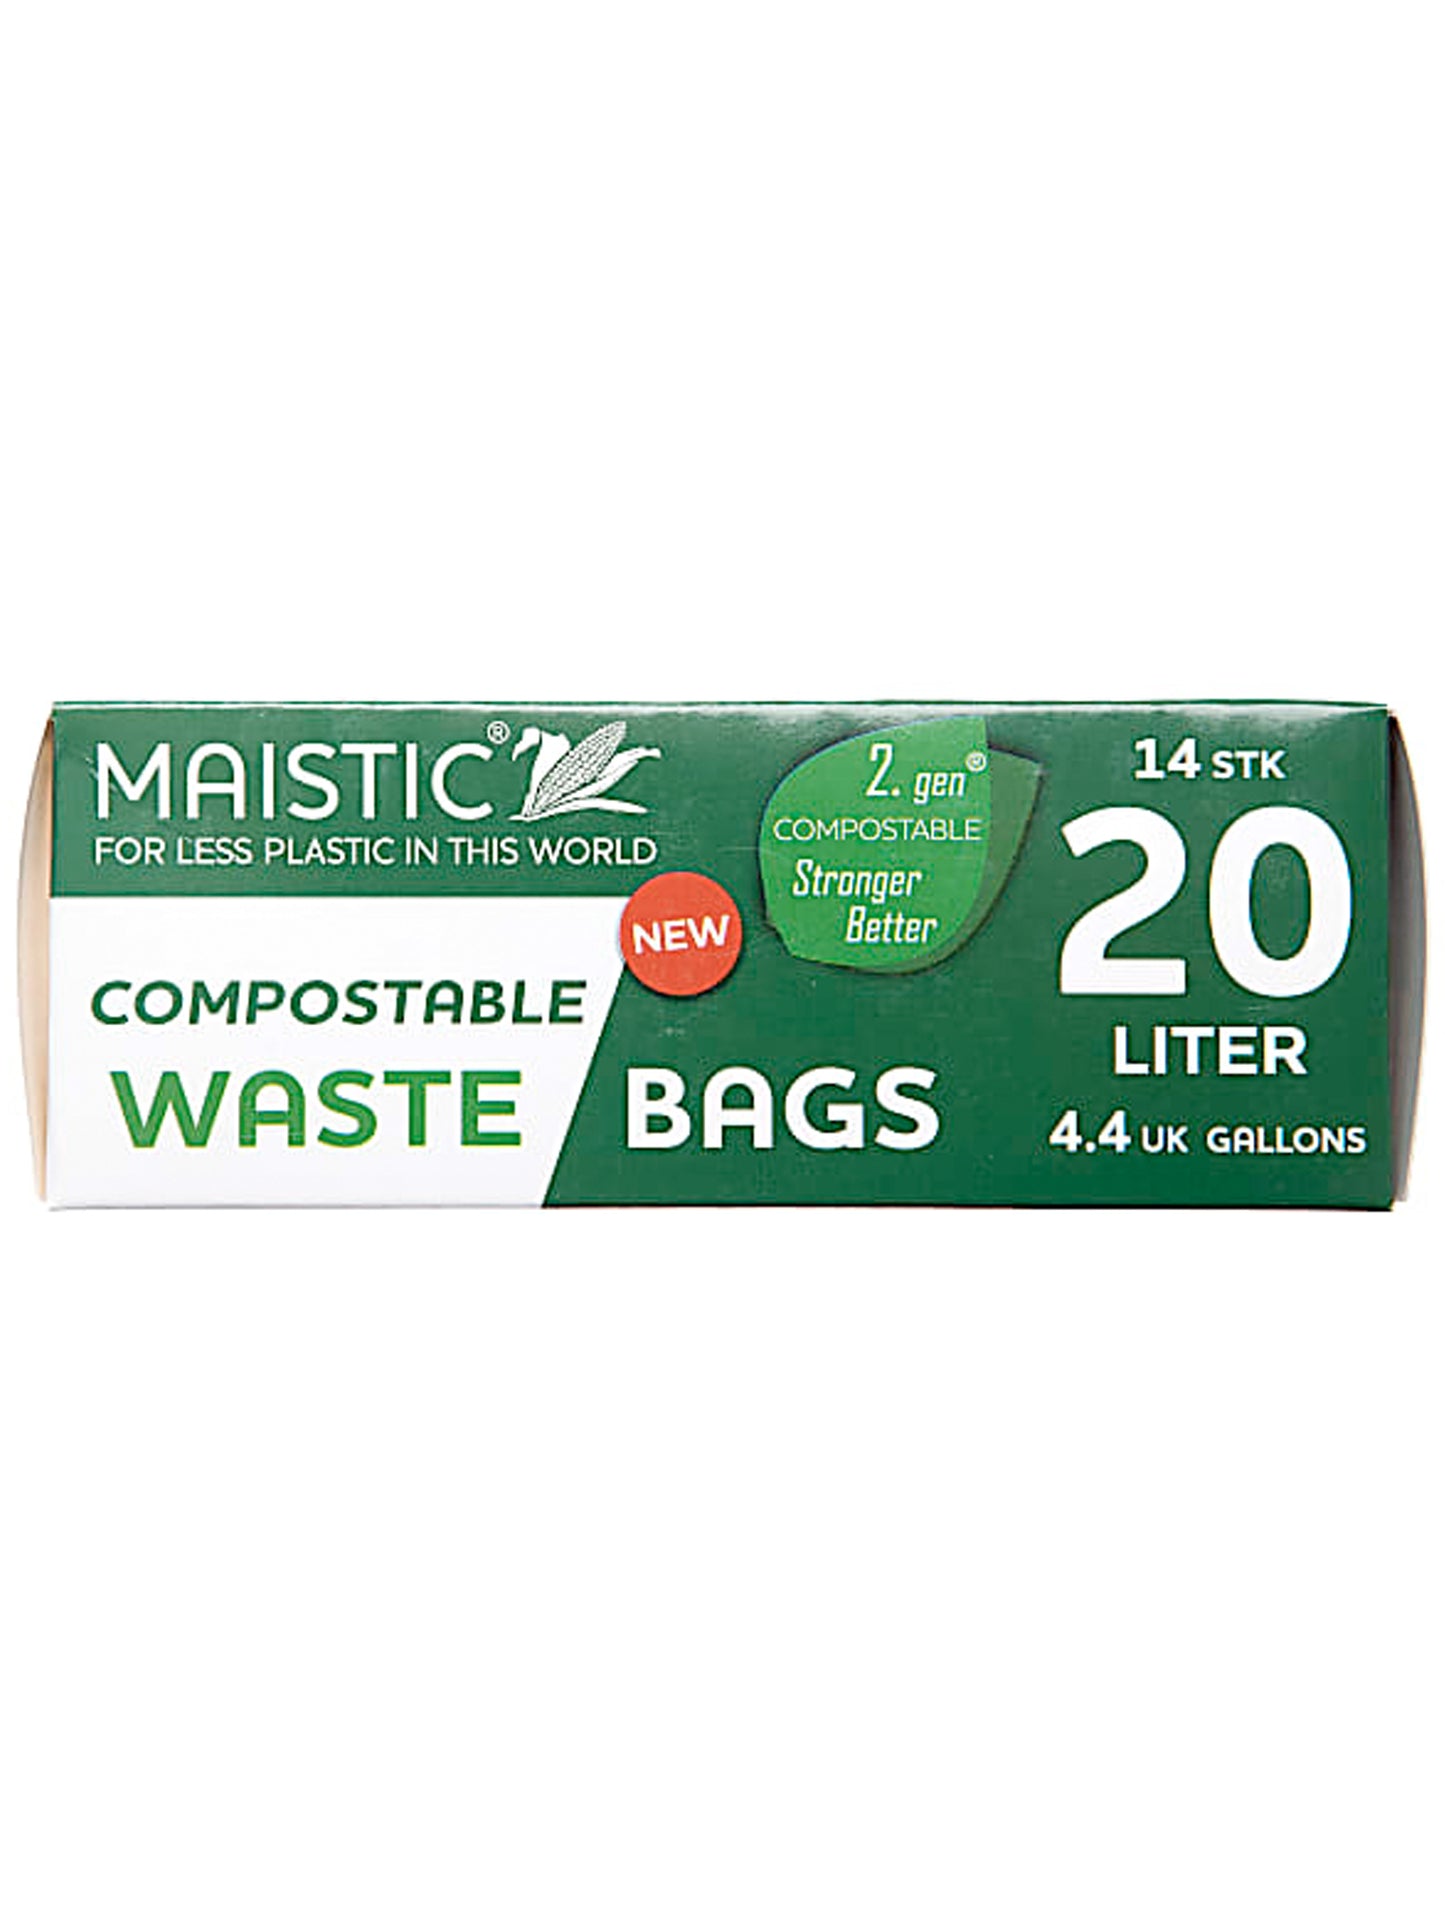 Maistic Gen 2 Compostable Waste Bag 20L 14 Pack | Will's Vegan Store